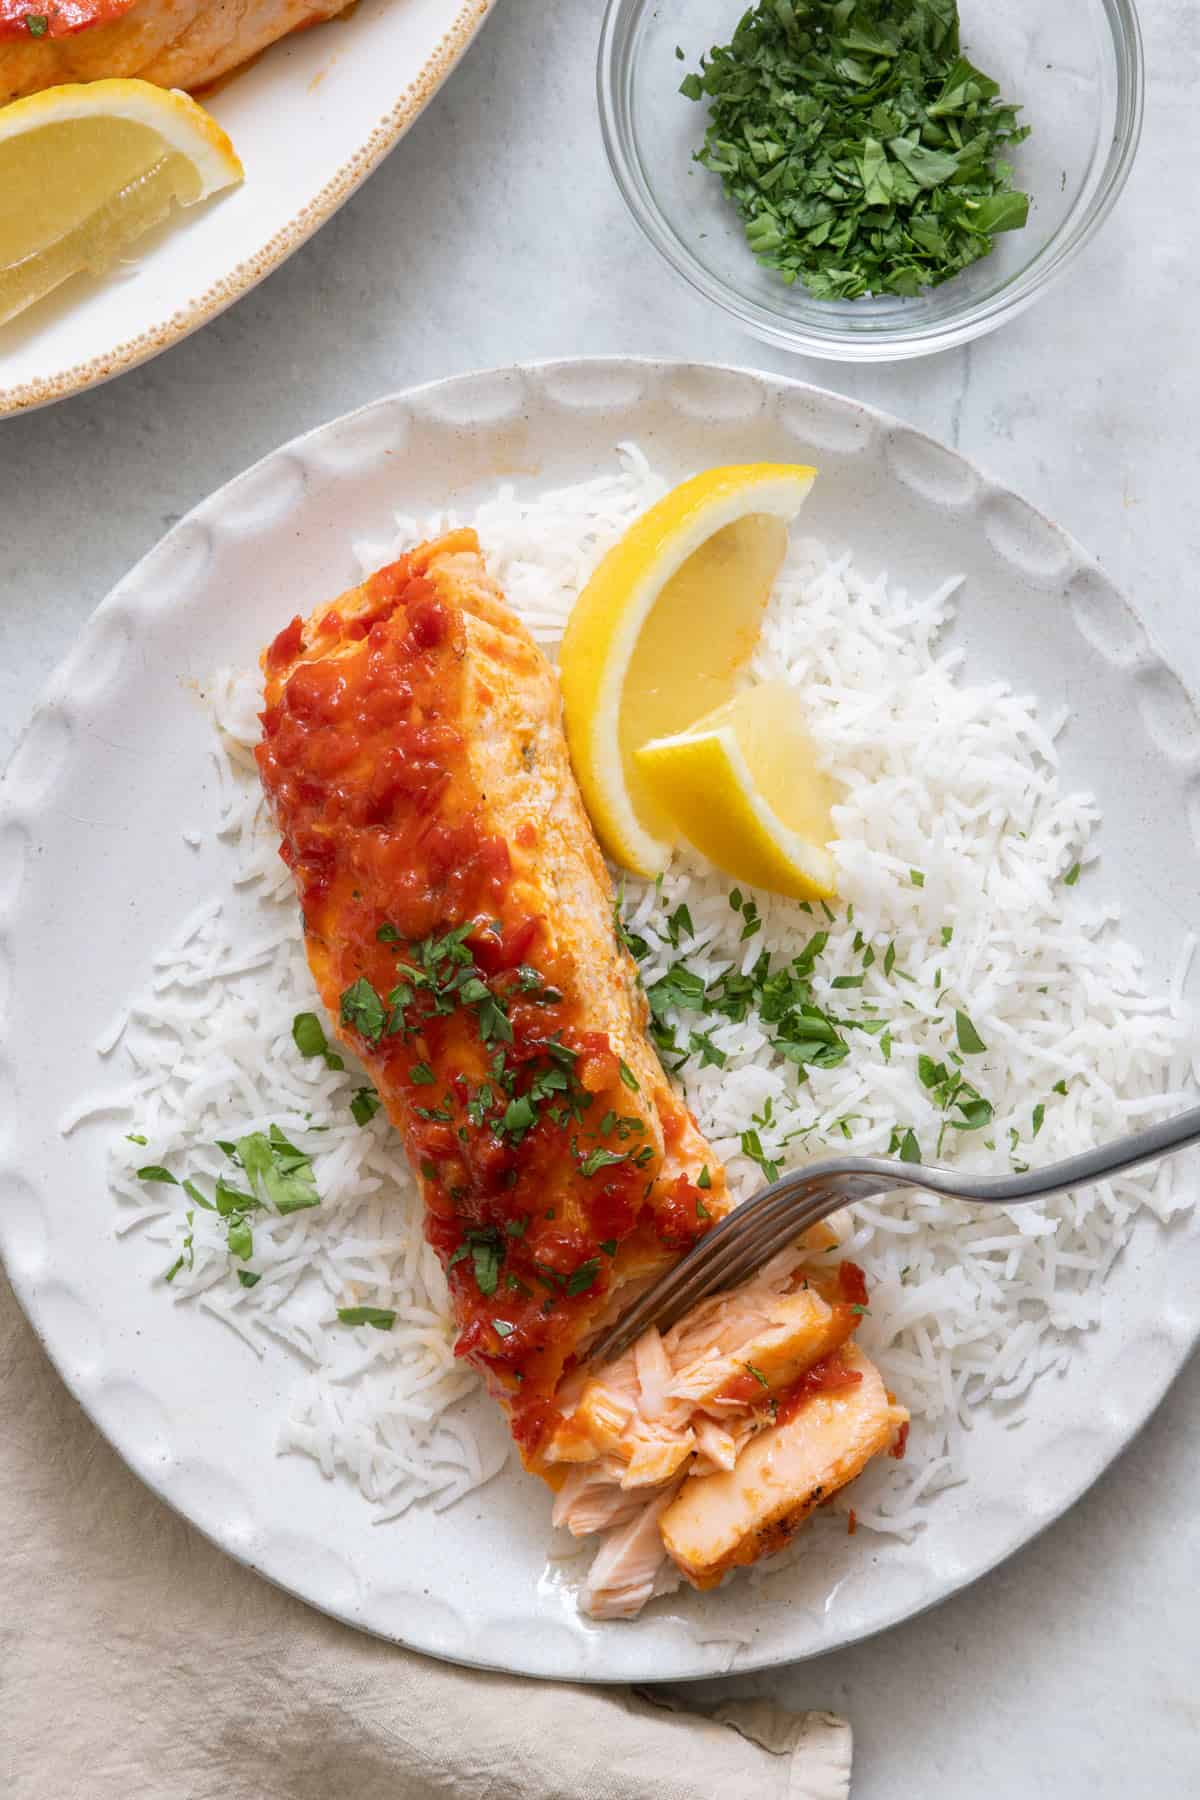 Salmon being flaked with fork over rice on a white plate with lemon wedges and parsley.